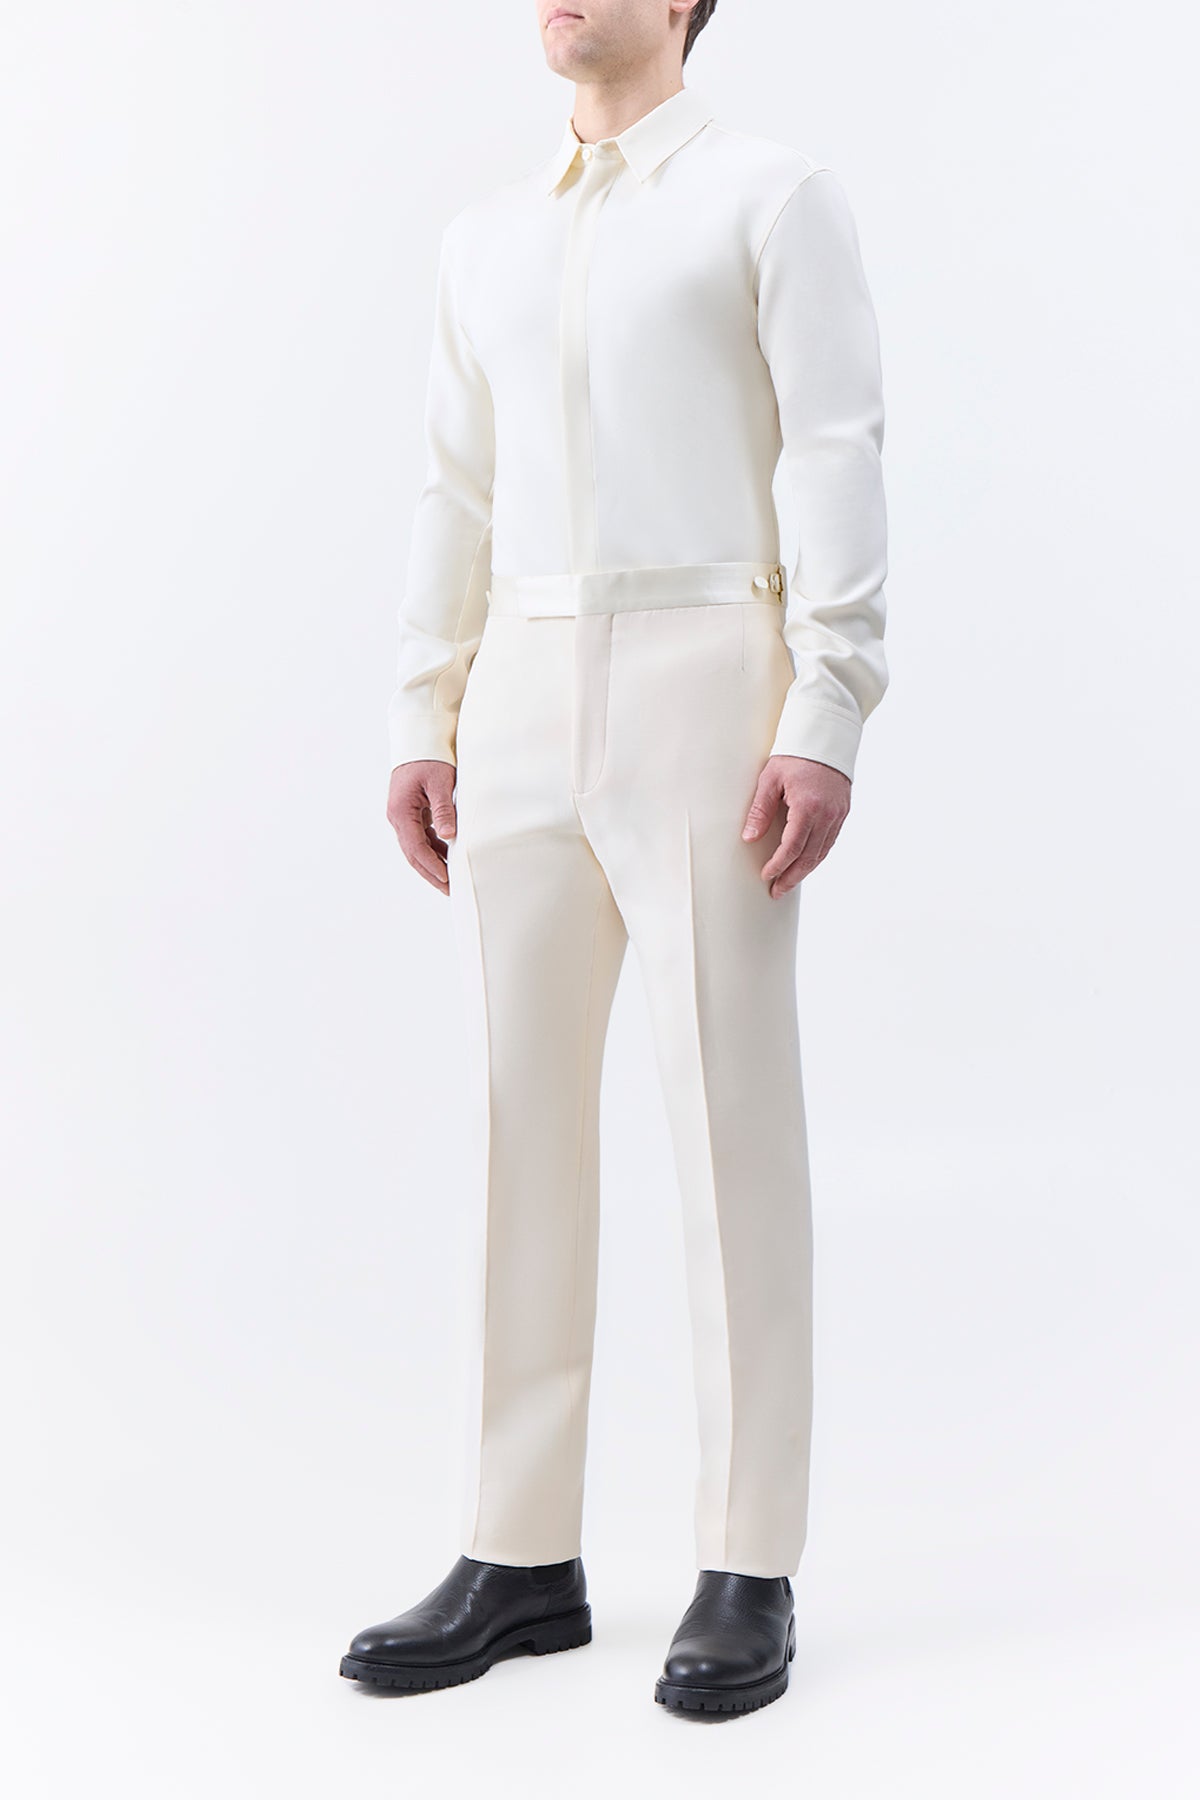 Simons Pant in Ivory Wool Silk Cady